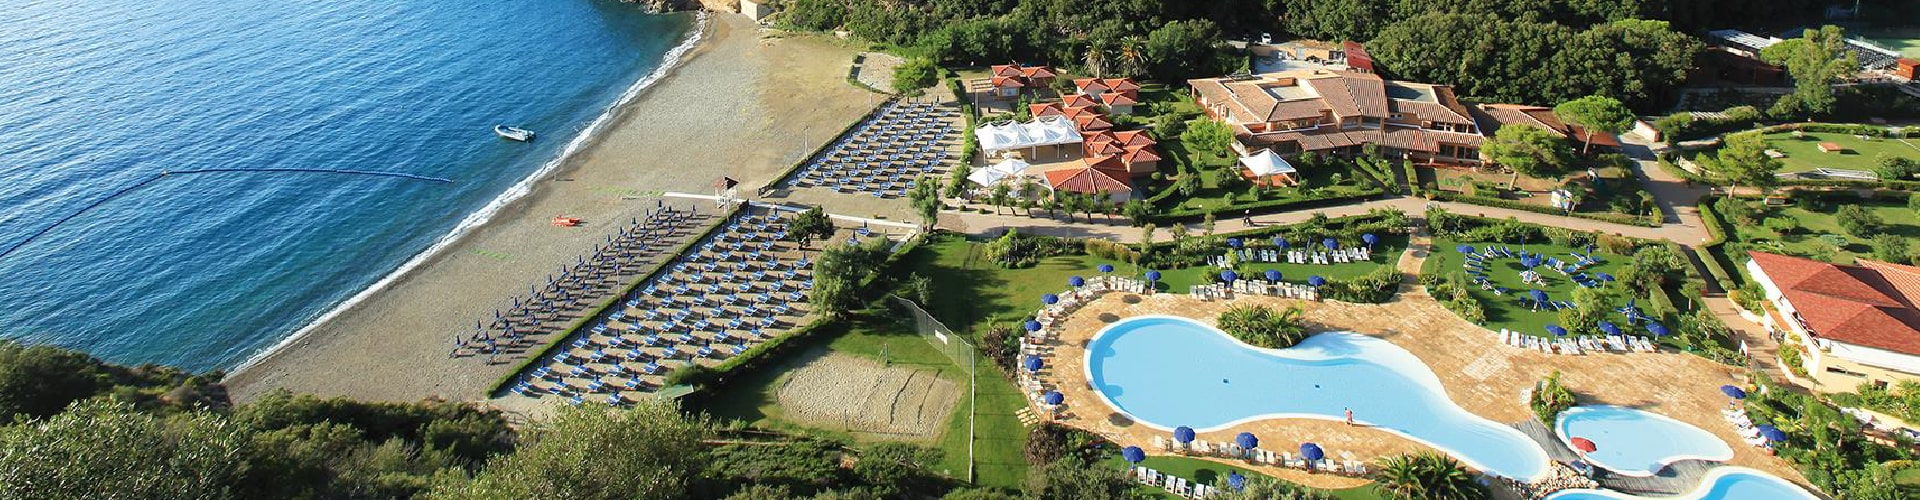 TH Ortano Mare Village &Residence